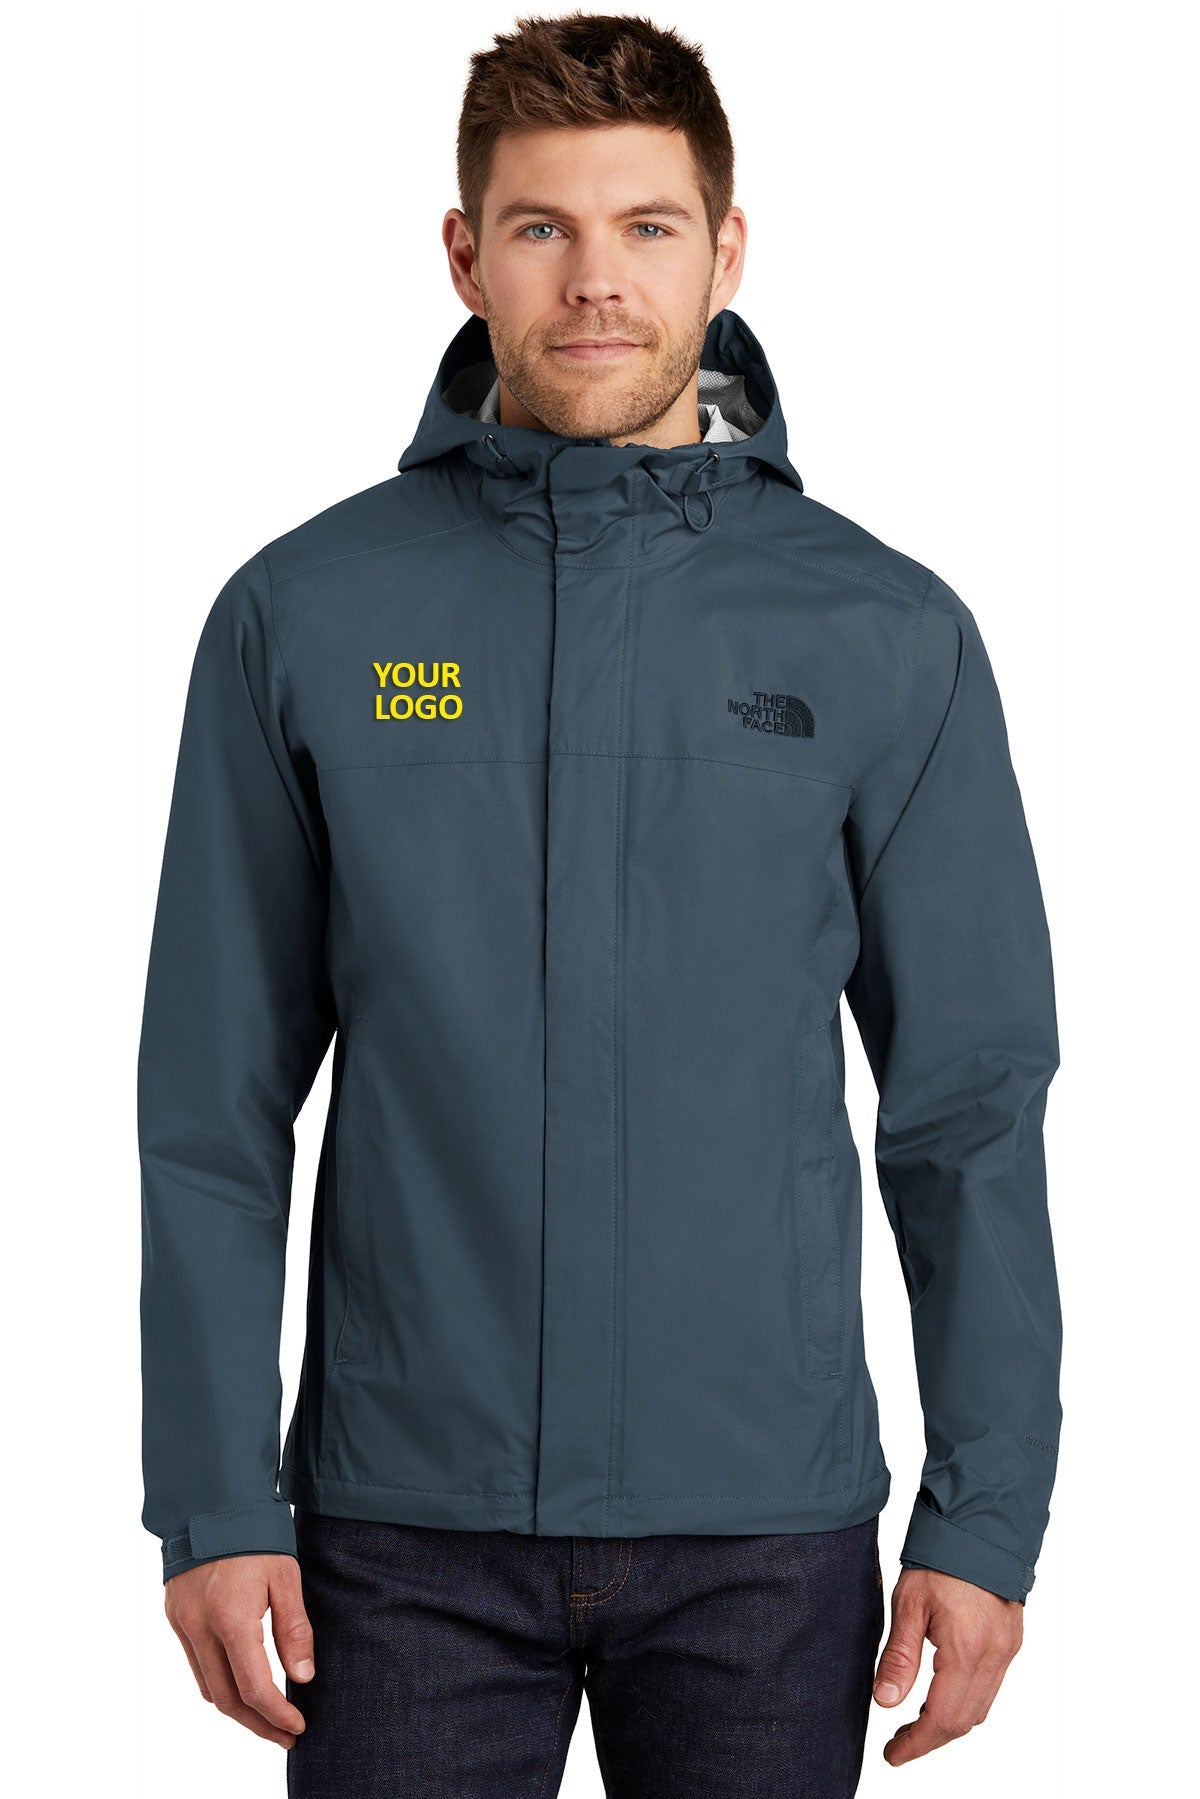 The North Face Shady Blue NF0A3LH4 jackets with company logo